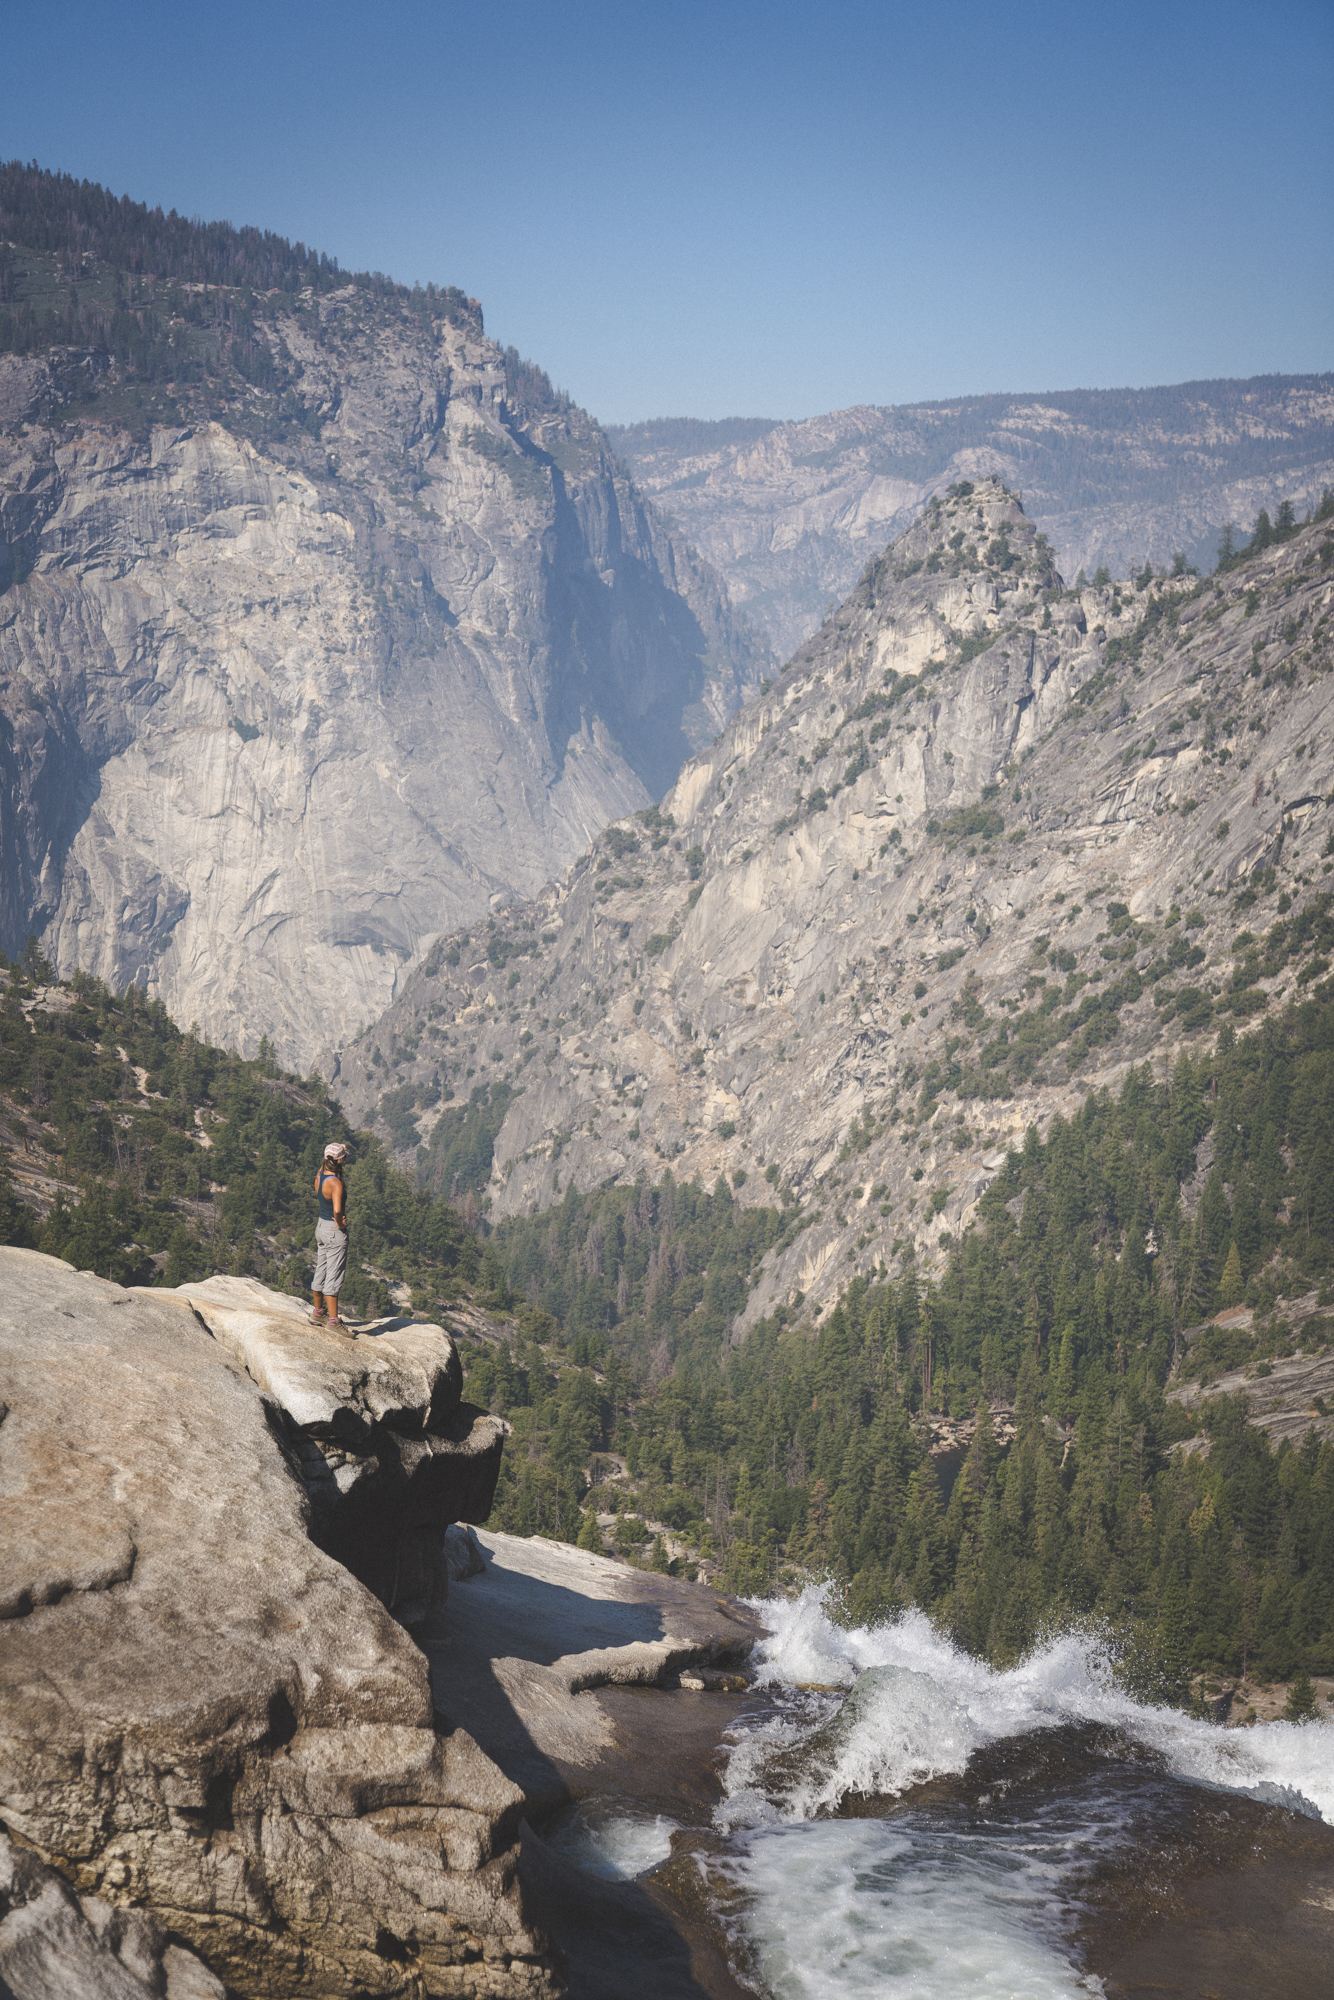 Looking out from the top of Nevada Fall. Photo by Mike Struna @designms